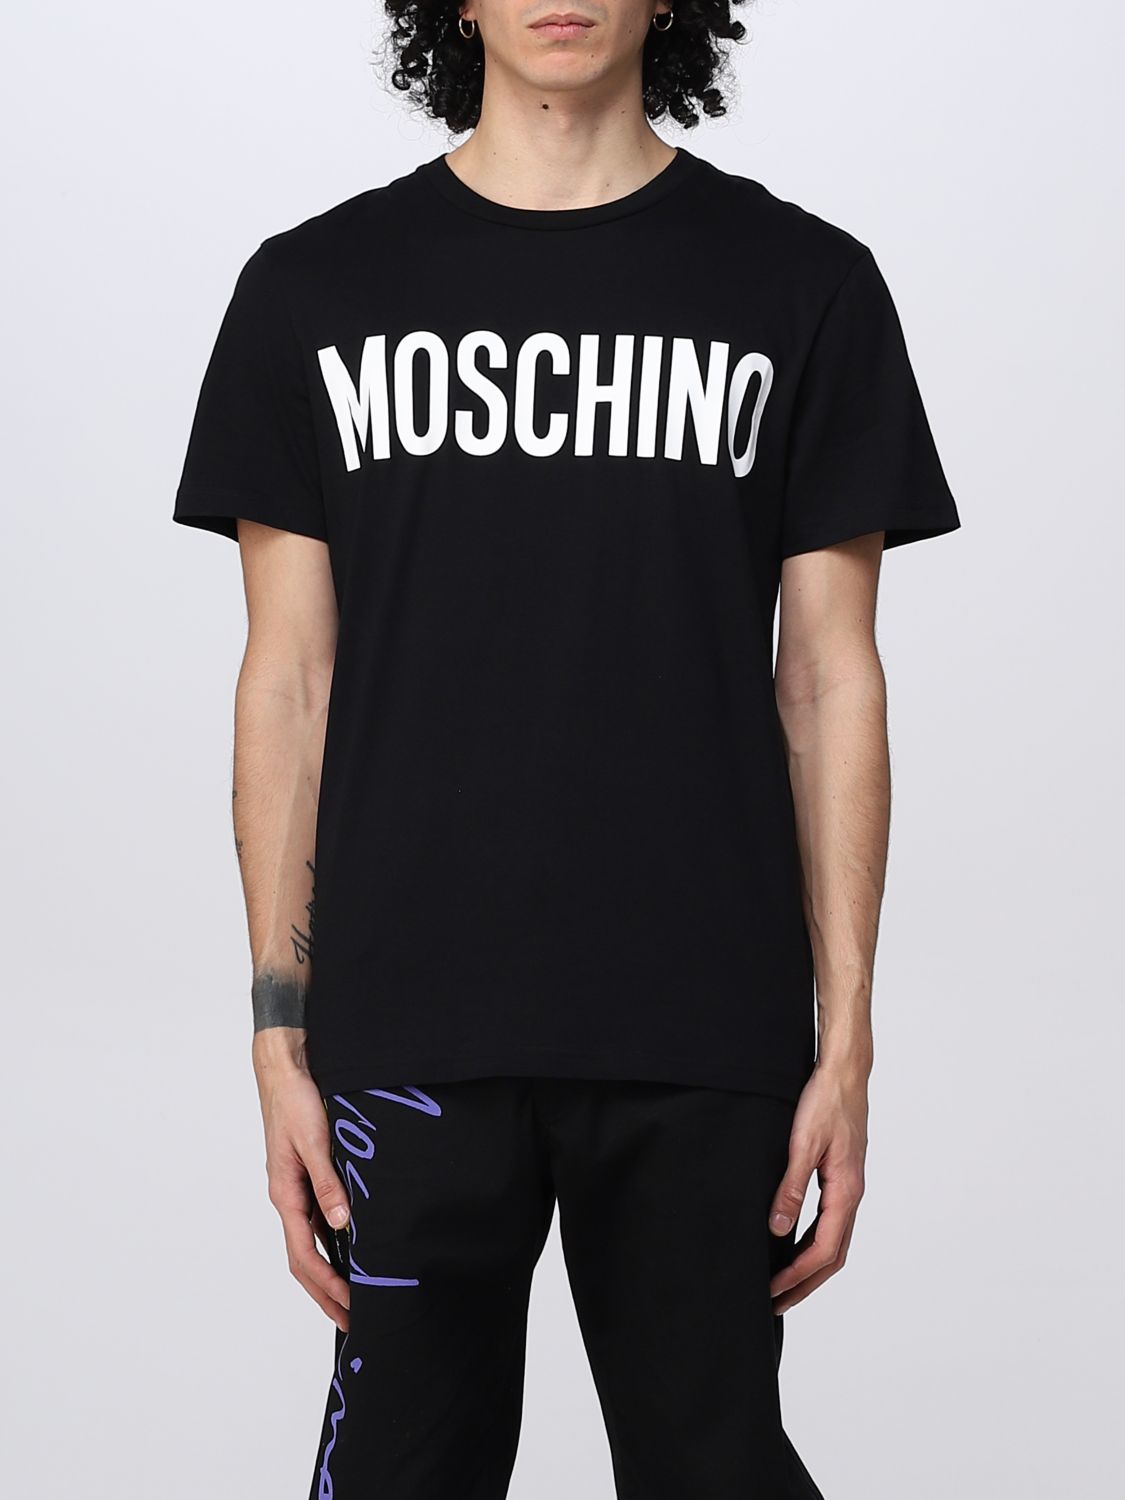 MOSCHINO COUTURE: t-shirt for man - Black | Moschino Couture t-shirt ...